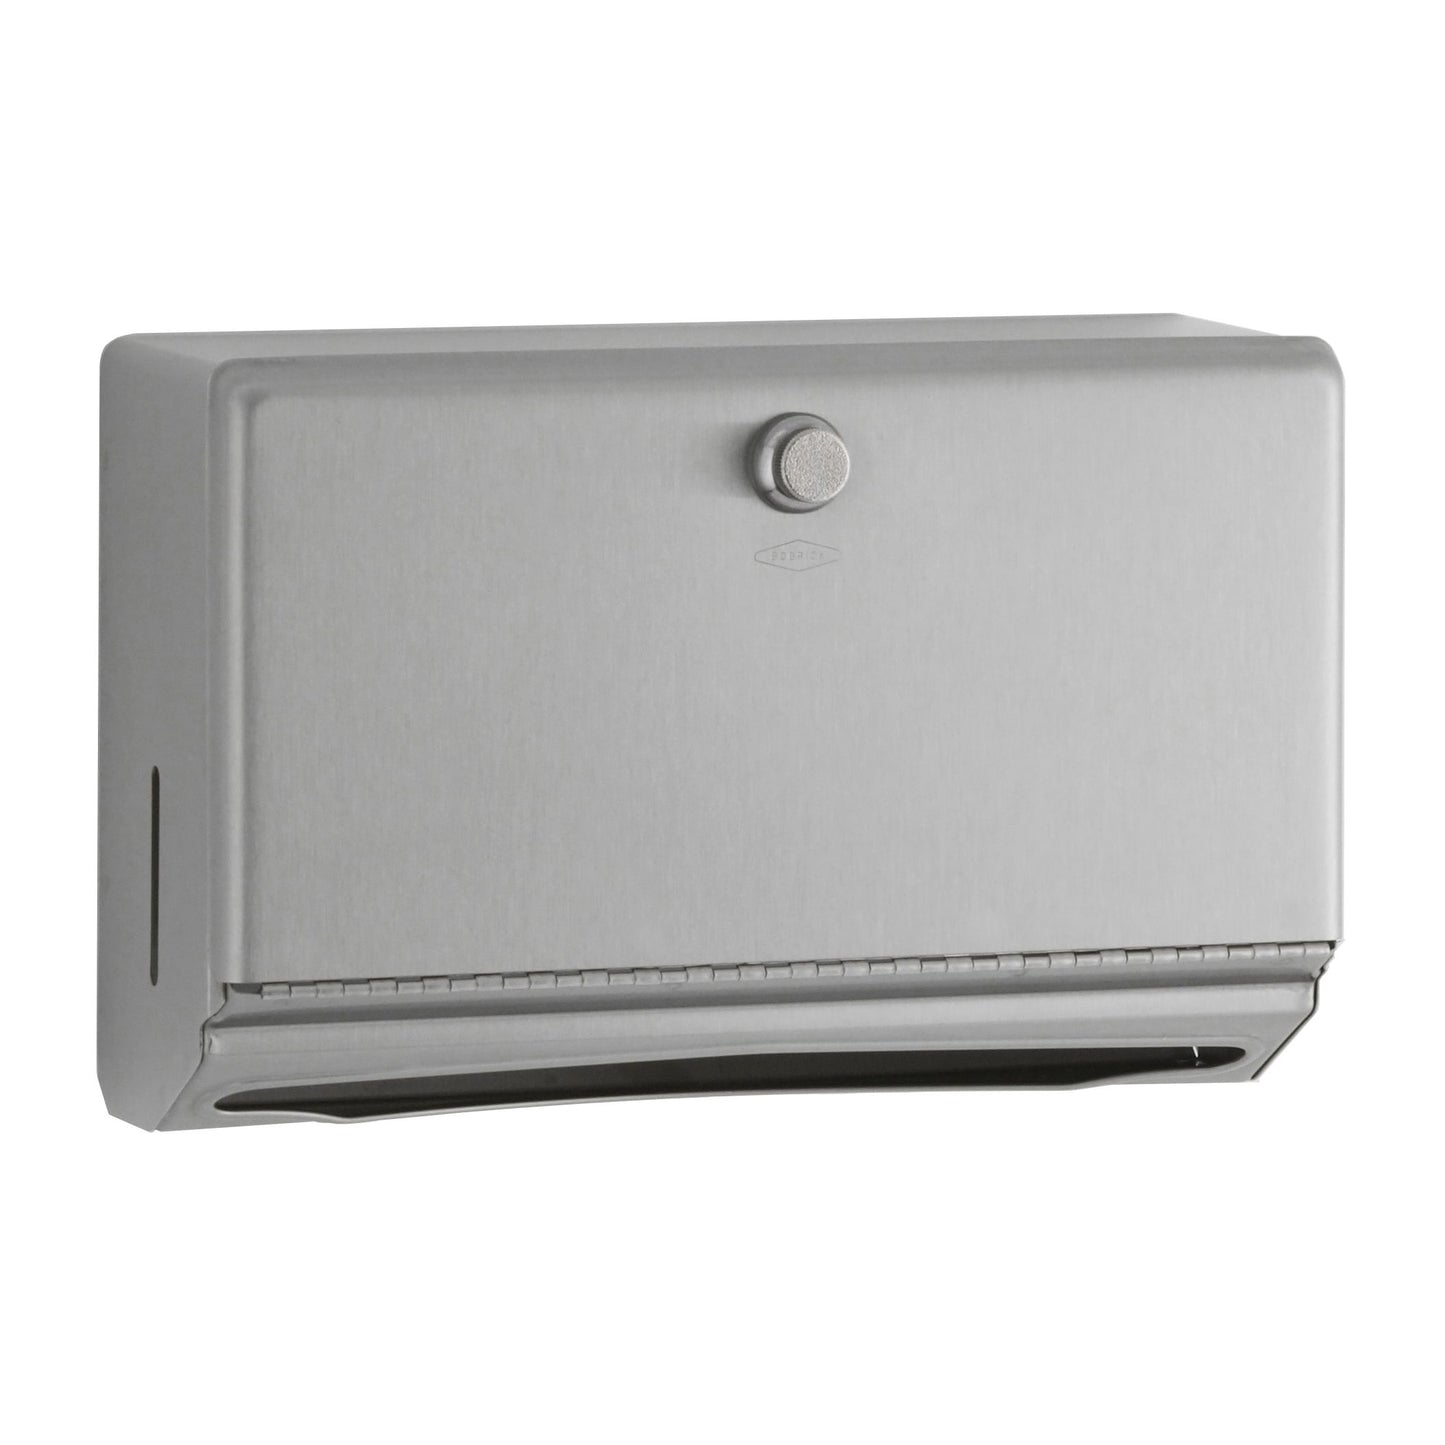 Bobrick 2621 - Classic Series Surface Mounted Paper Towel Dispenser in Satin Stainless Steel